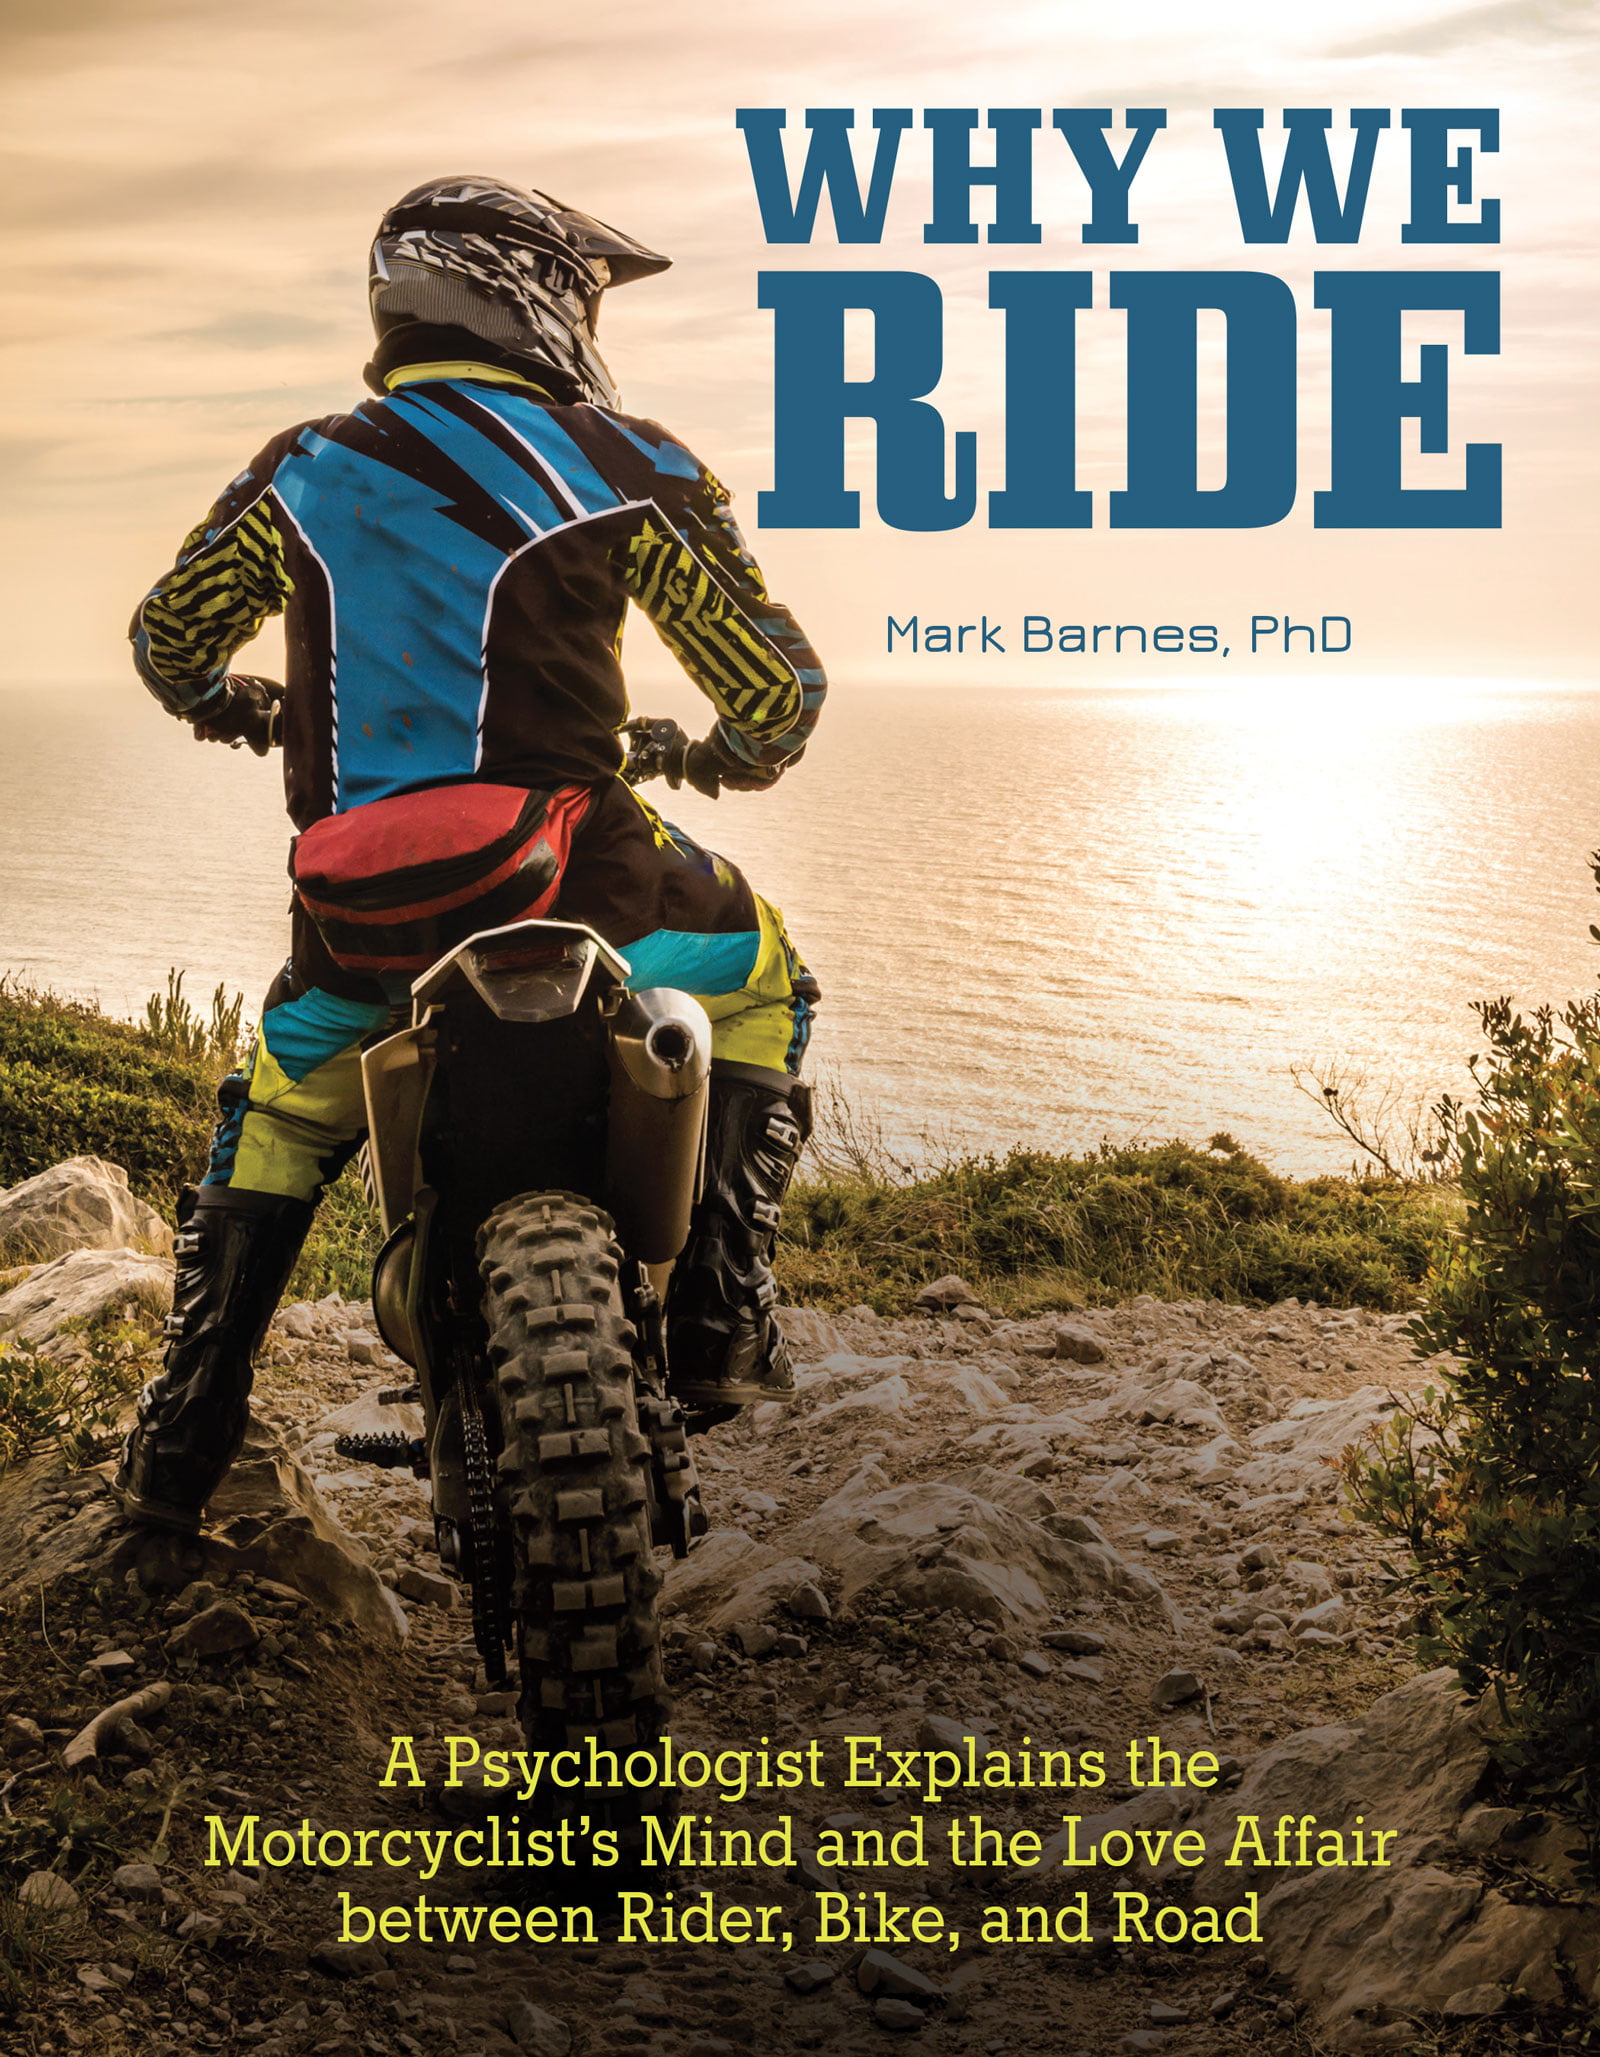 Why-We-Ride-A-Psychologist-Explains-the-Motorcyclists-Mind-and-the-Relationship-Between-Rider-Bike-and-Road